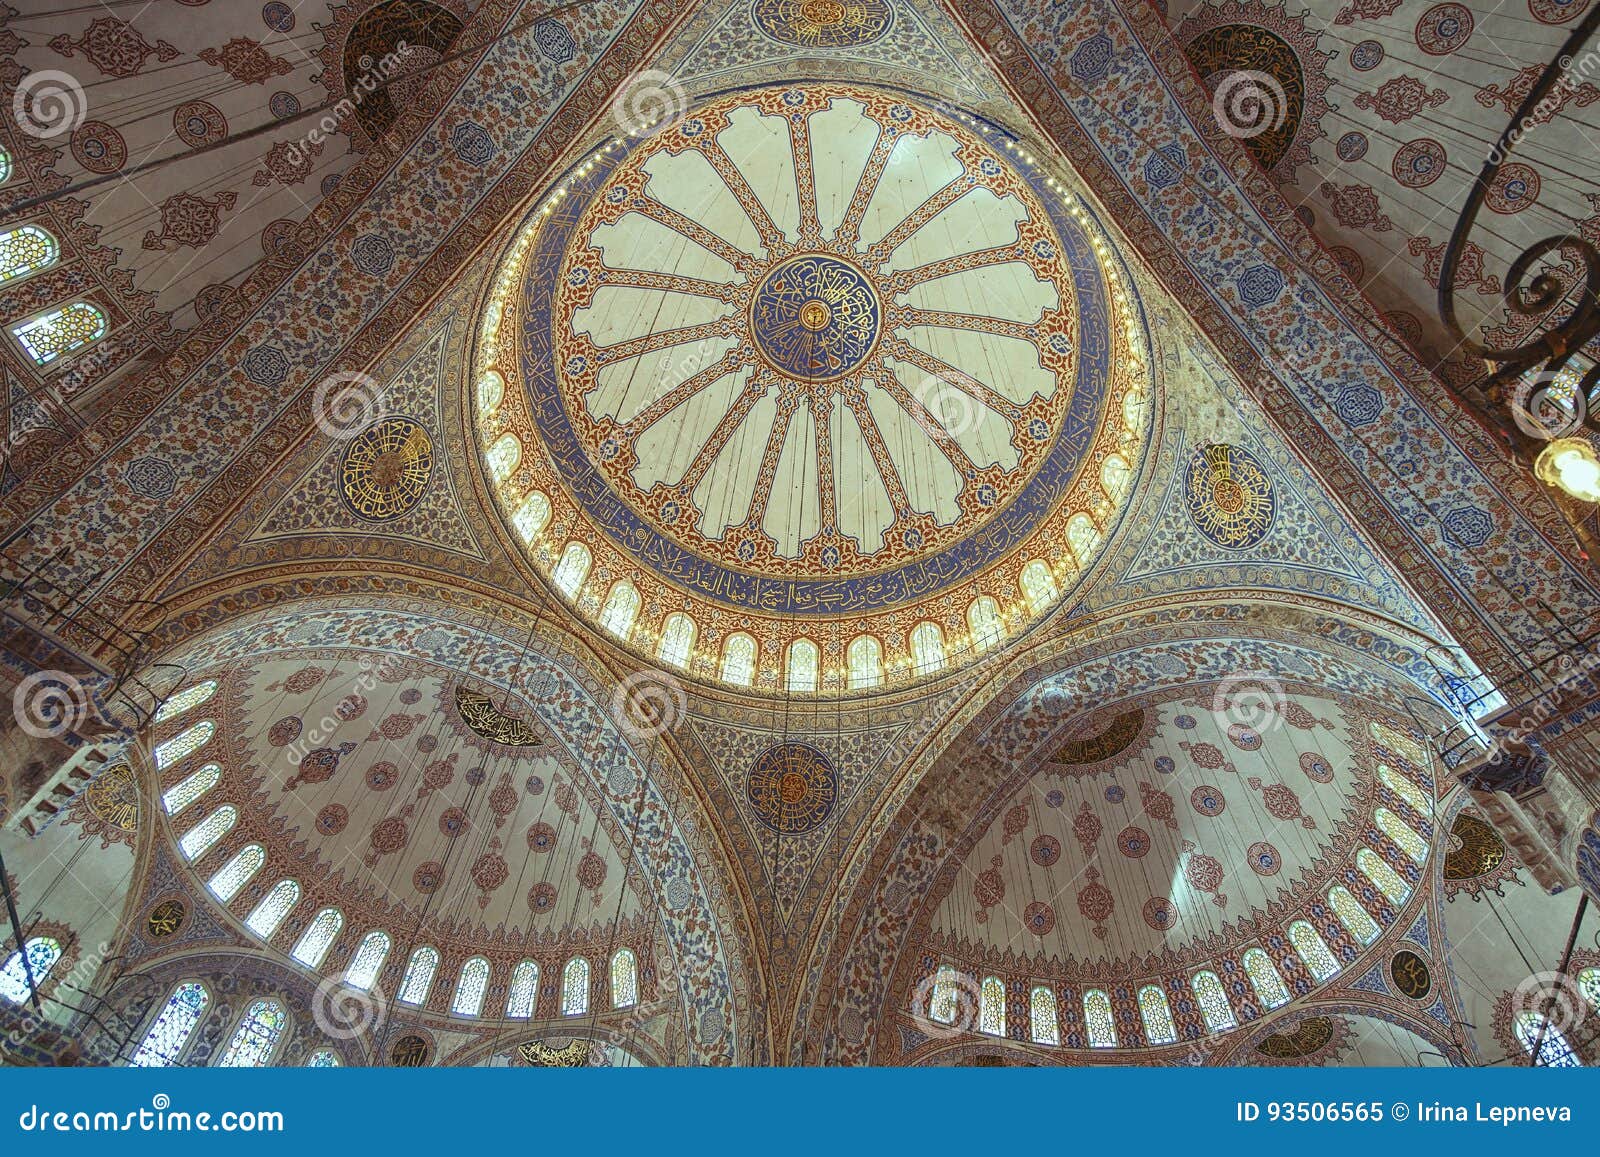 Elements Of Interior Decoration Of The Blue Mosque Editorial